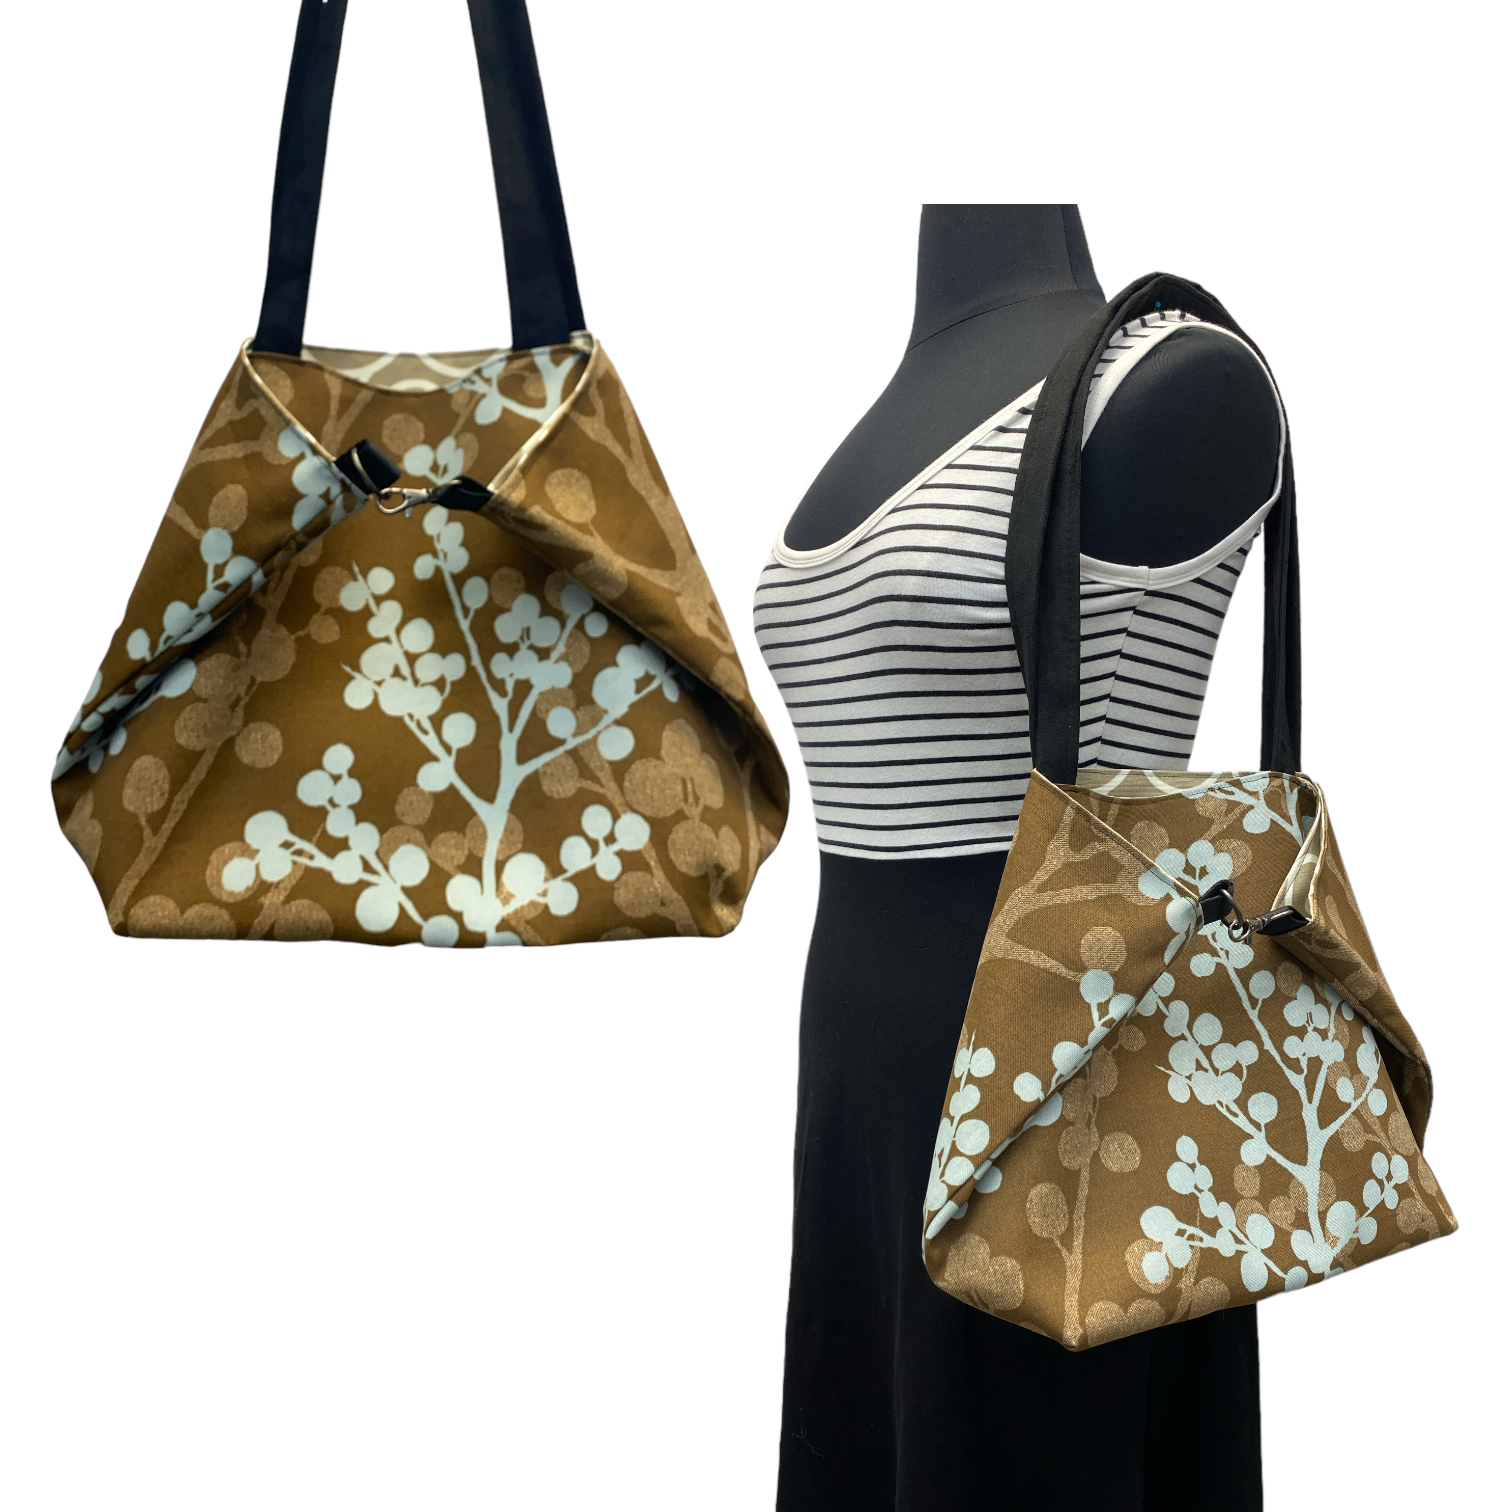 Simple Sack TOTE - Baby Blue & Brown Blossoms